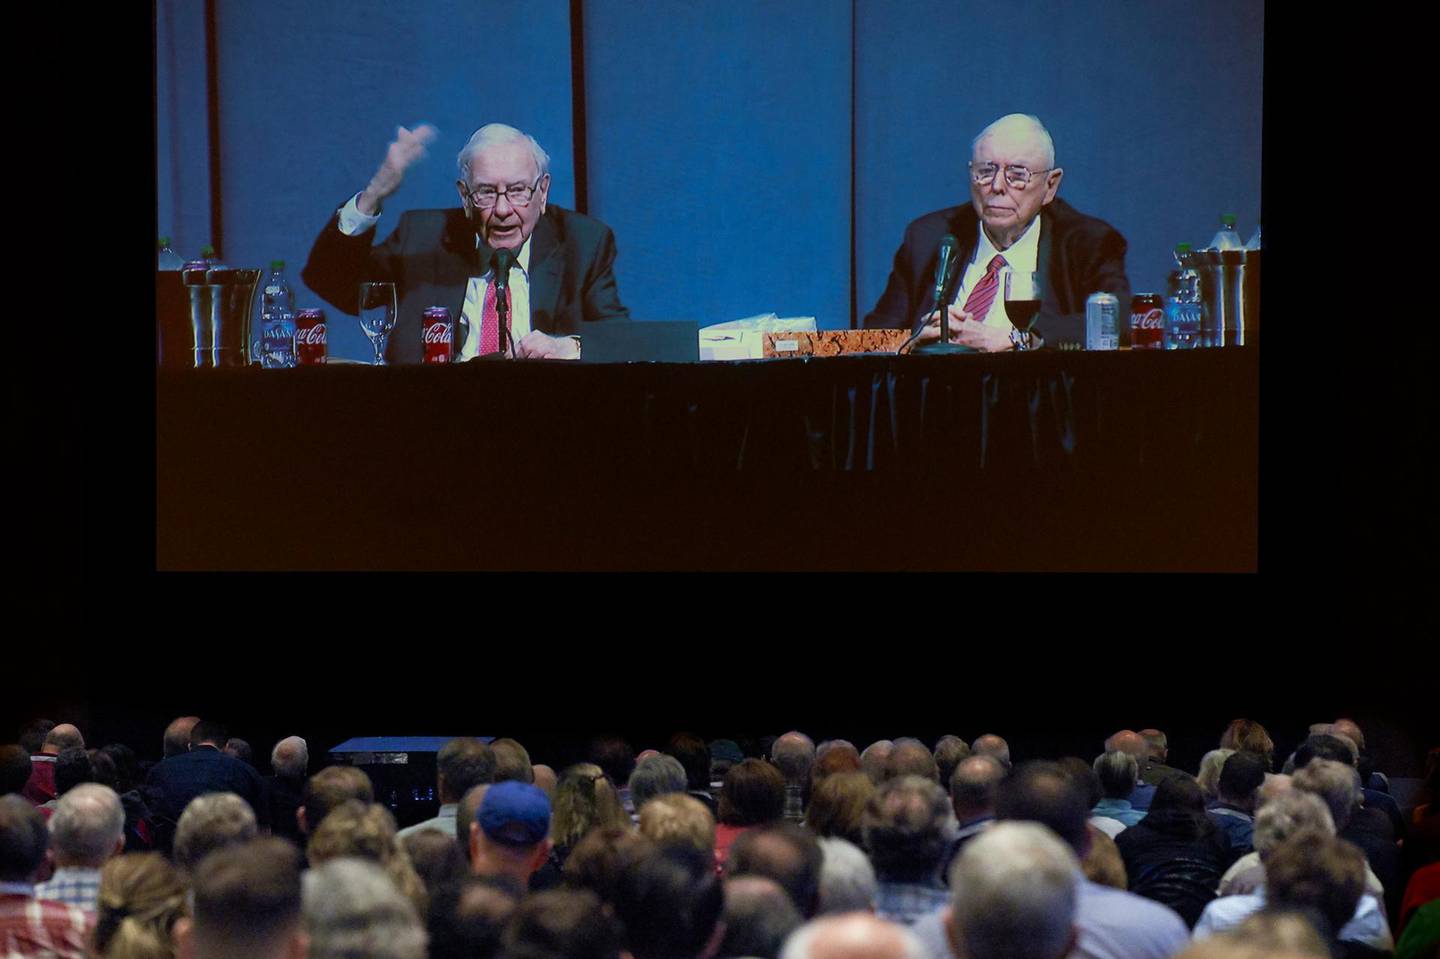 Shareholders in an overflow room watch on a big screen as Berkshire Hathaway Chairman and CEO Warren Buffett, left, and Vice Chairman Charlie Munger preside over the annual Berkshire Hathaway shareholders meeting in Omaha, Neb., Saturday, May 4, 2019. An estimated 40,000 people are thought to be in town for the event, where Buffett and Munger spend hours answering questions. (AP Photo/Nati Harnik)